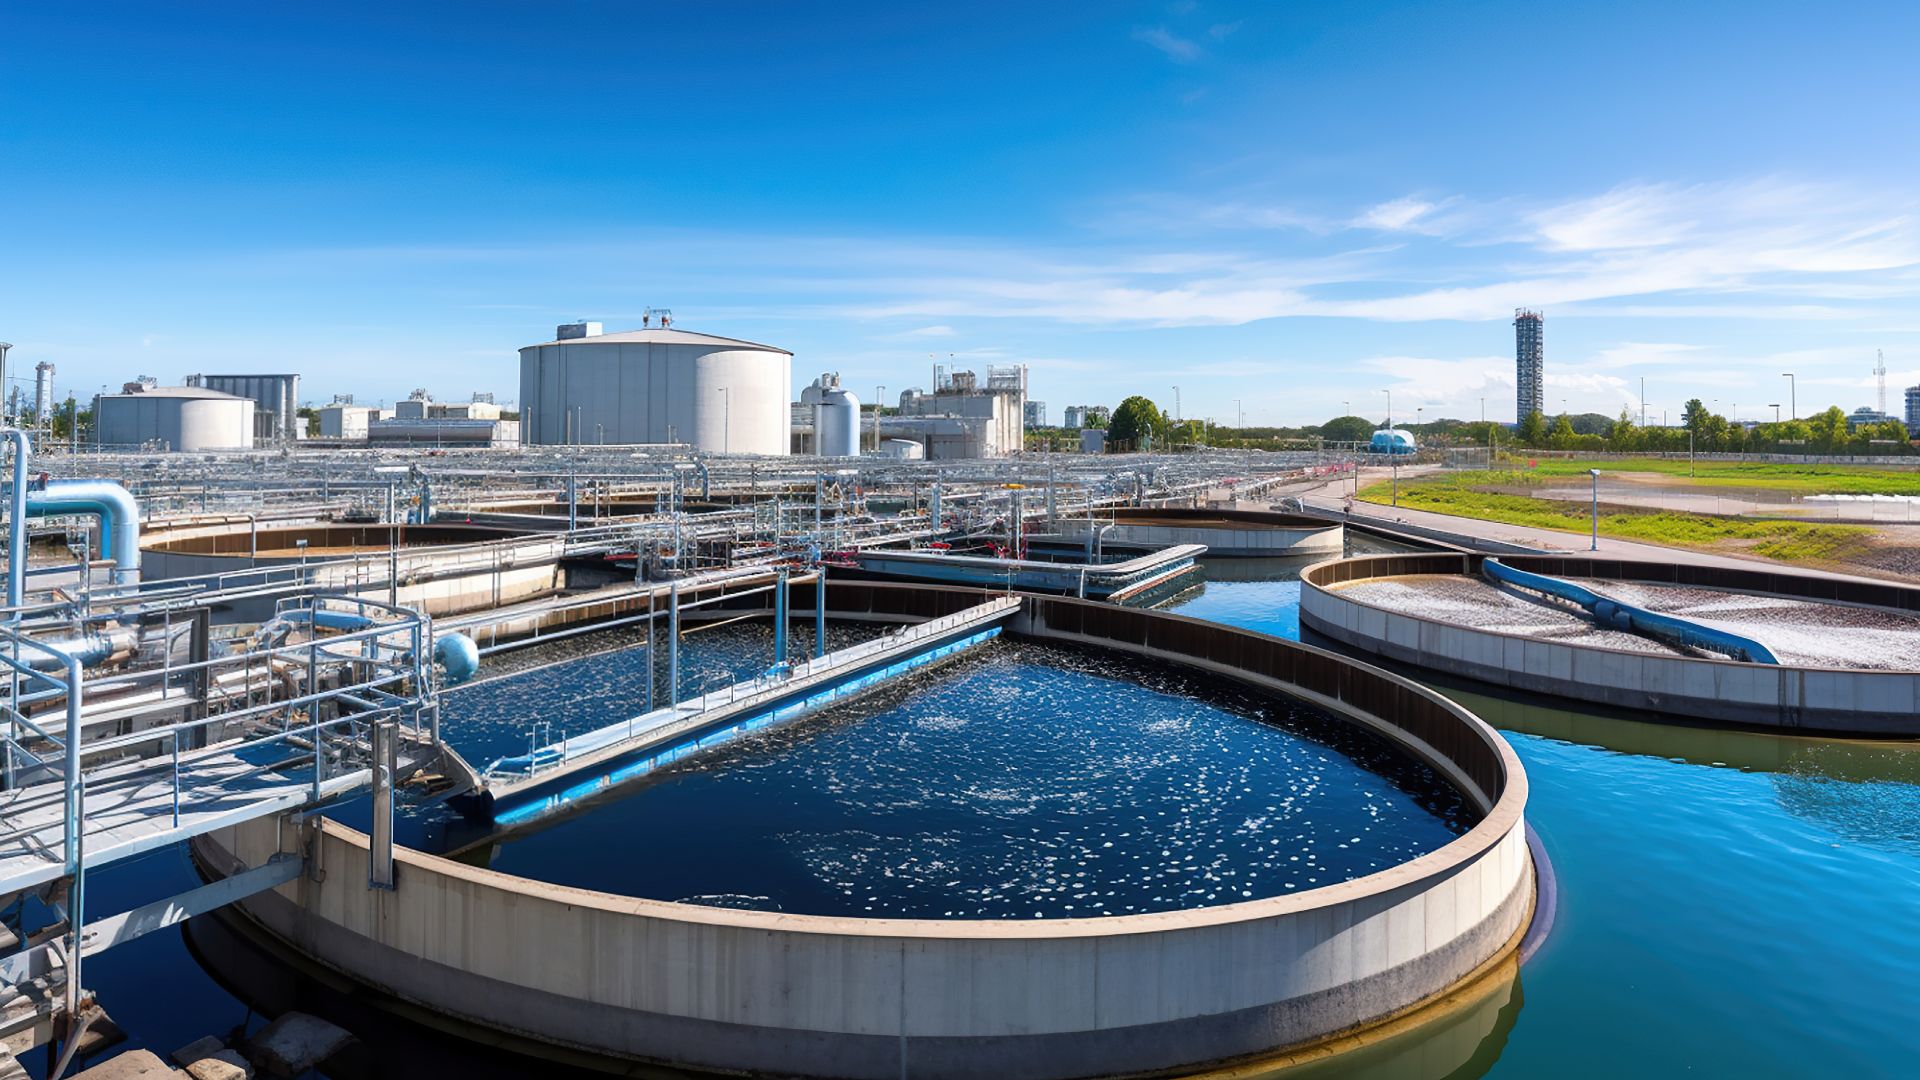 Wastewater treatment plant in Netherlands